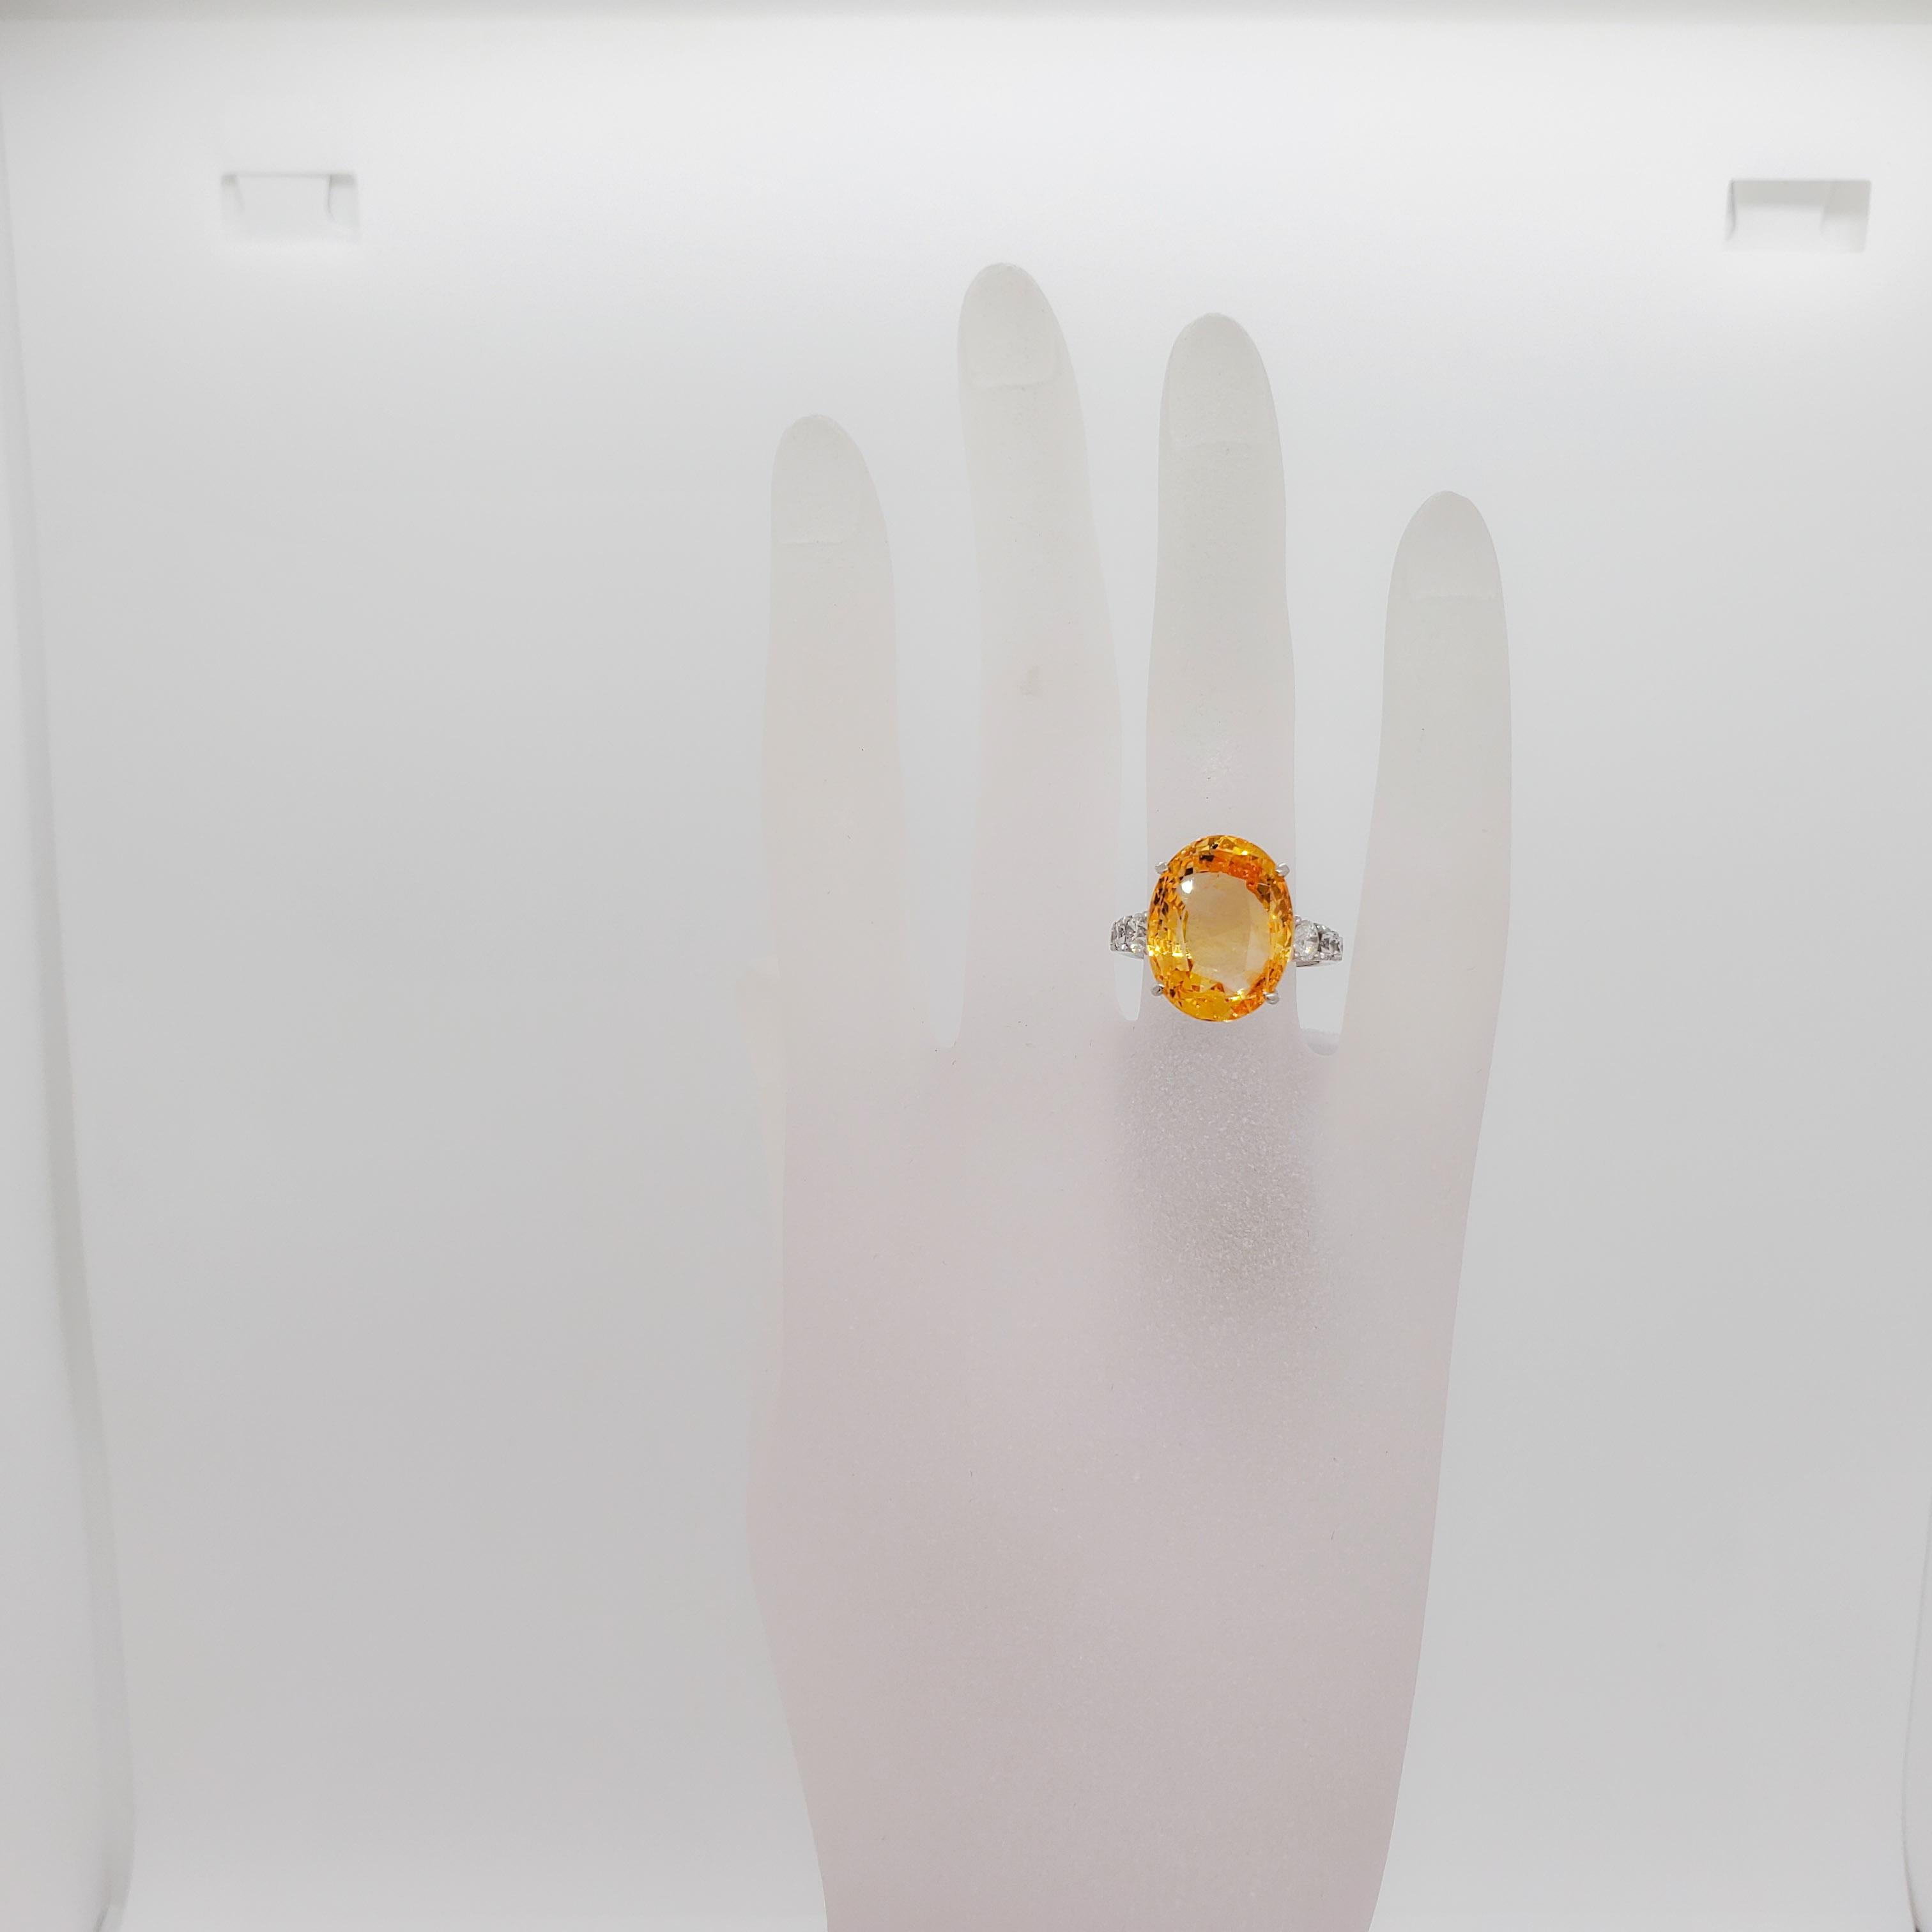 Gorgeous golden 14.46 ct. Sri Lanka yellow sapphire oval with 0.67 ct. good quality white diamond rounds.  Handmade platinum mounting in ring size 6.  Yellow sapphire is no heat.  